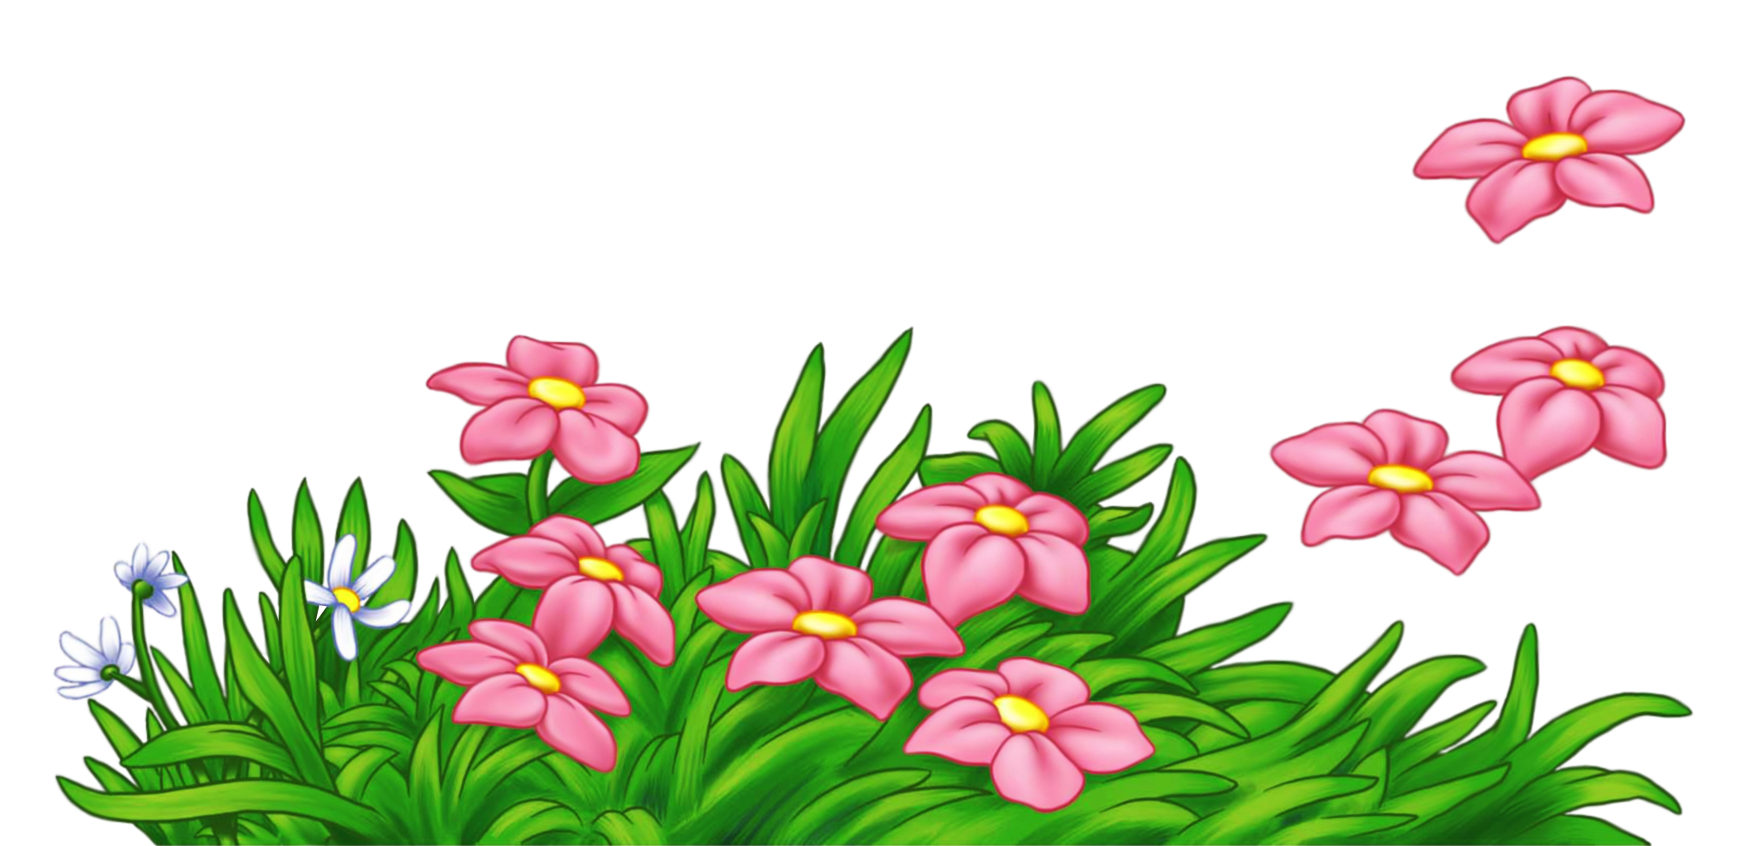 Grass With Flower Clipart